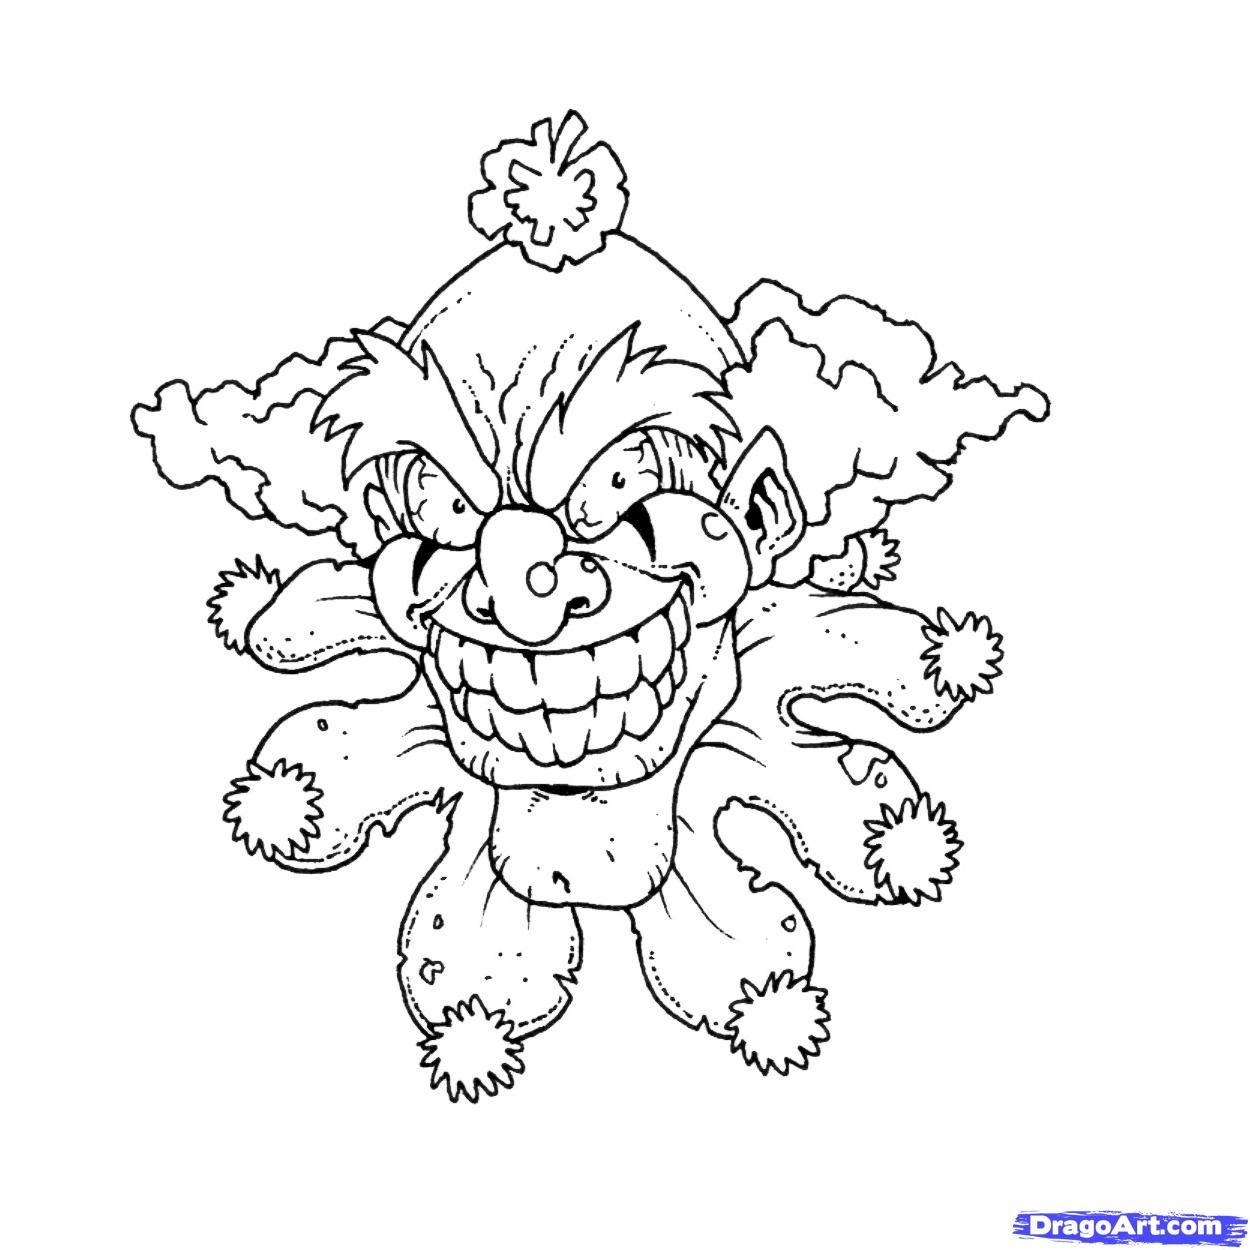 evil clown coloring pages free female clown drawings in pencil google search clown evil pages coloring 